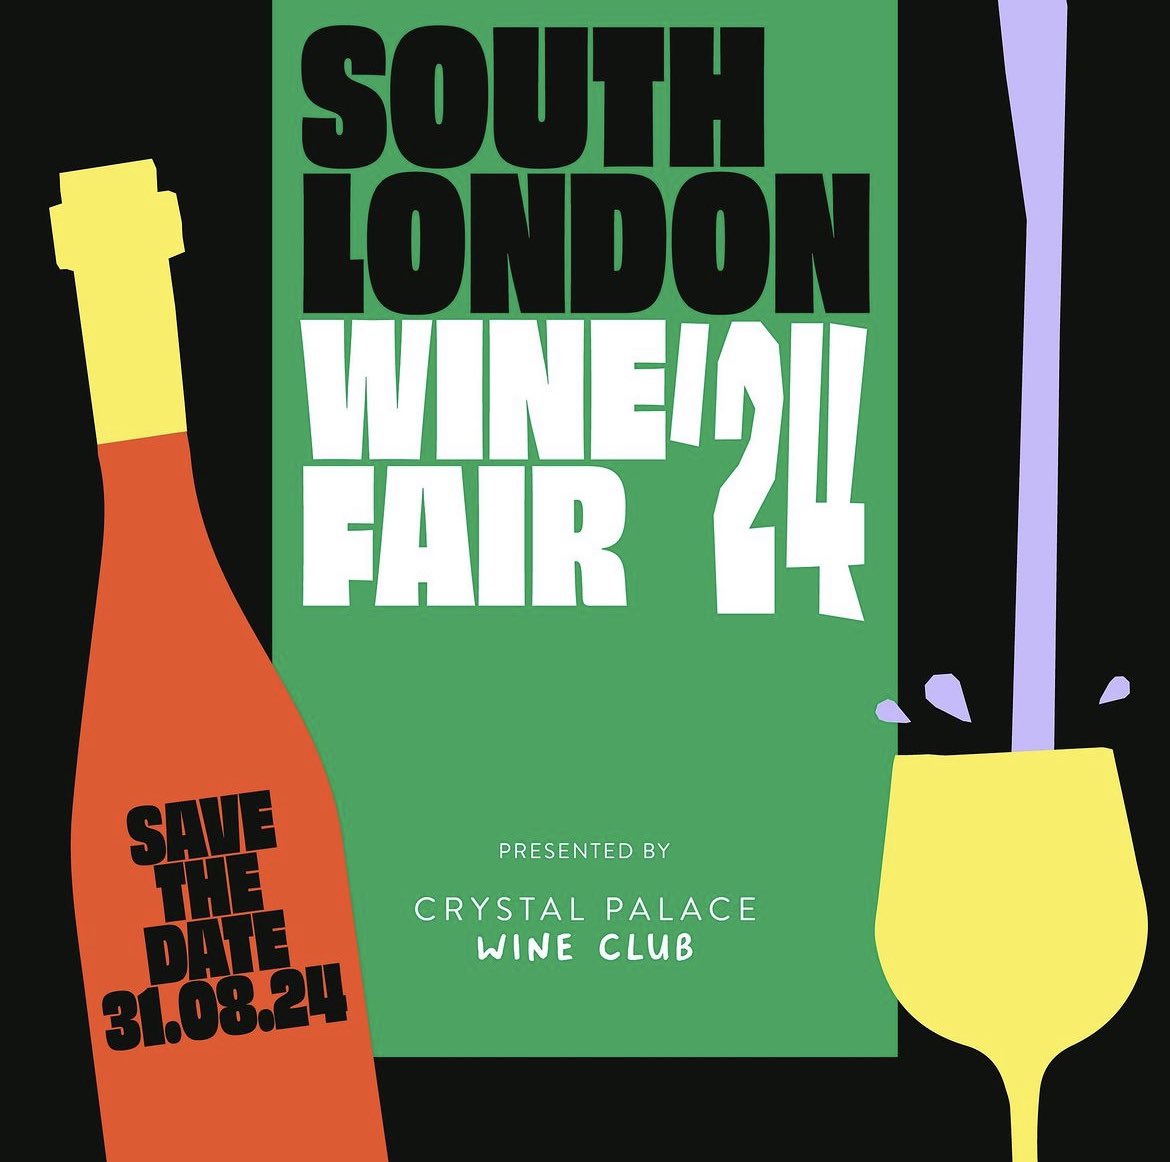 🍷 Save the date to pull the cork: Following the success of last years inaugural event, this summer the South London Wine Fair is back at the Bowl! On Saturday 31 August, pair your Malbec with Marley or your Pinot with Pink Floyd on our iconic stage. More details soon.